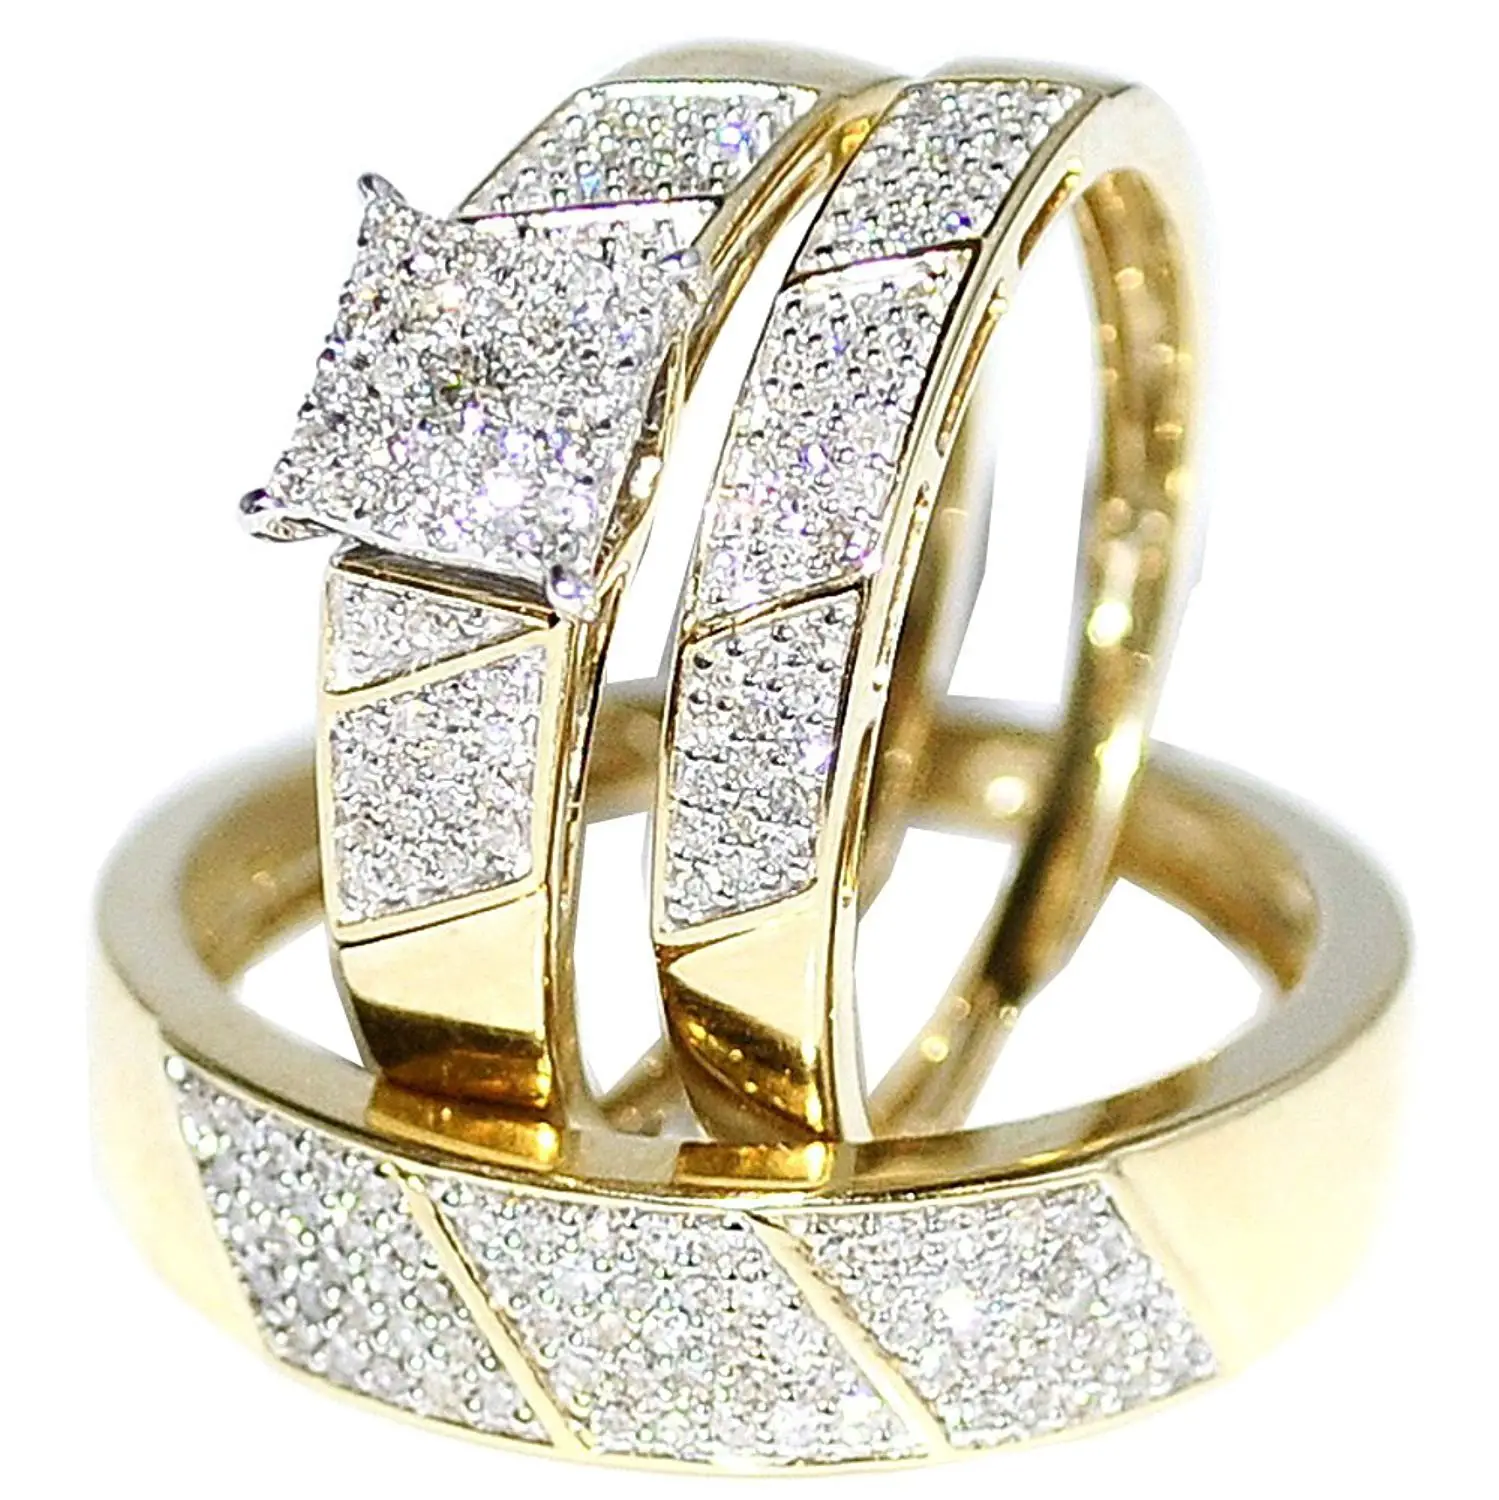 25 Ideas for Cheap Wedding Ring Sets His and Hers